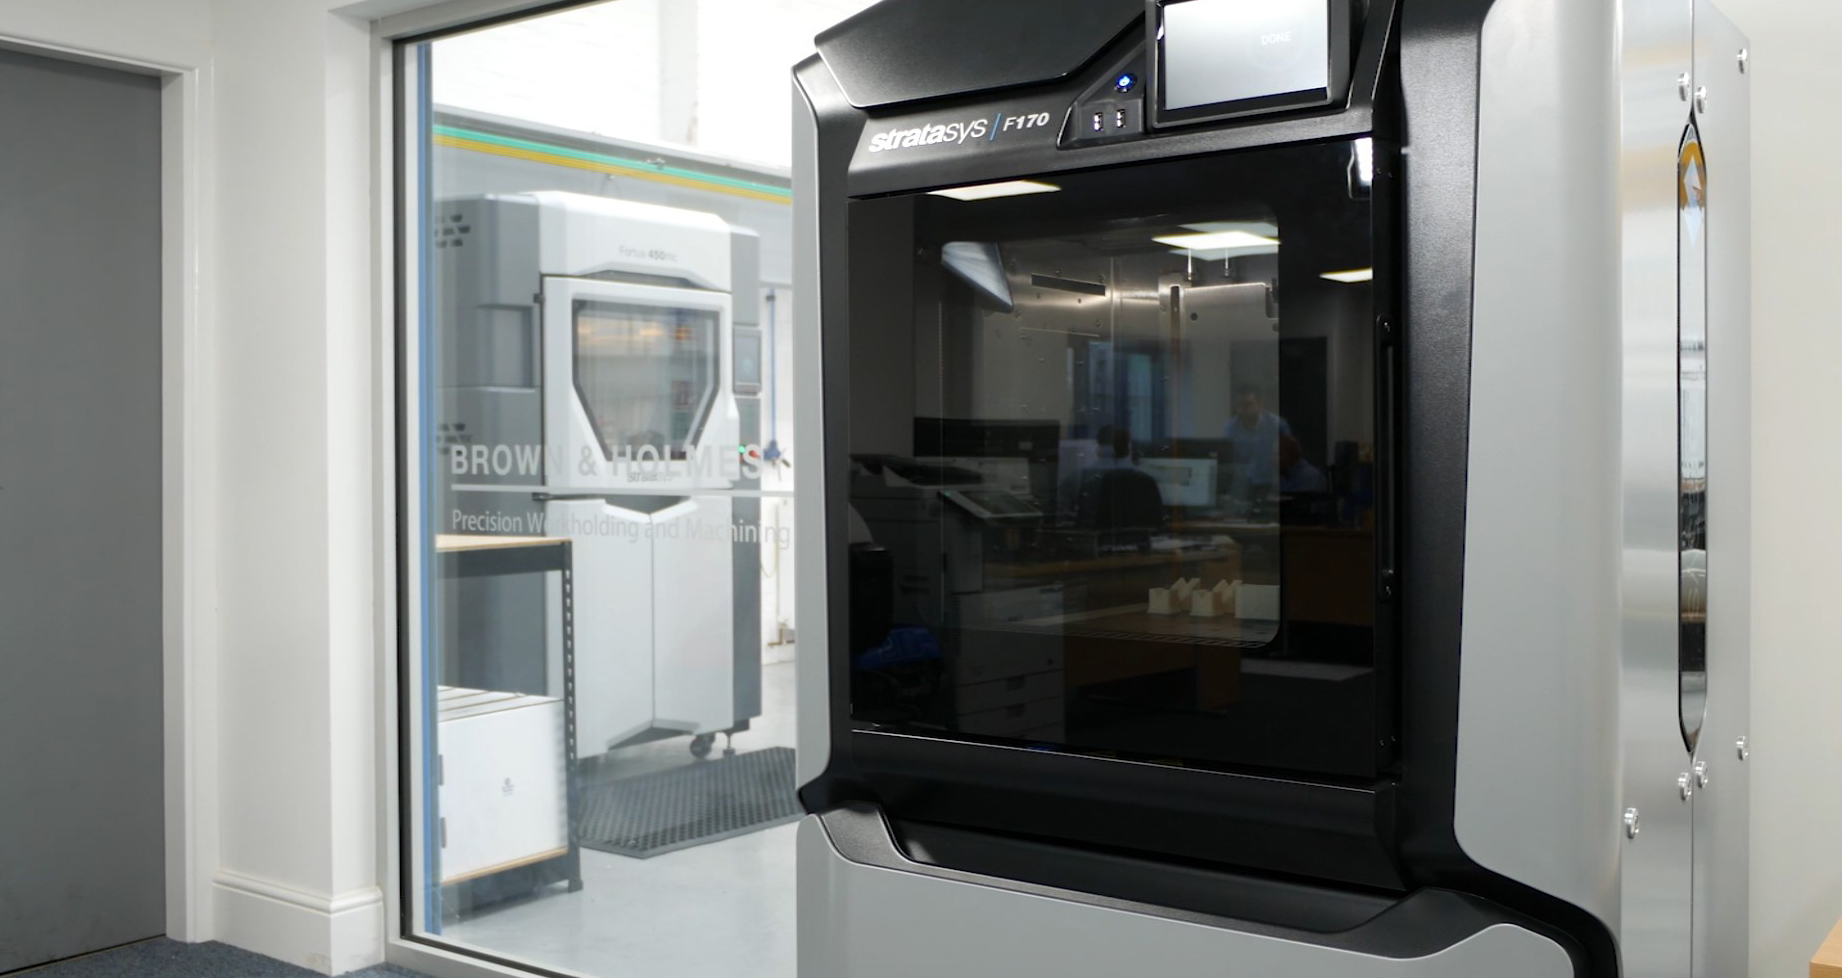 The Stratasys F170 and Fortus 450mc installed on the shop floor at Brown & Holmes. Photo via SYS Systems.